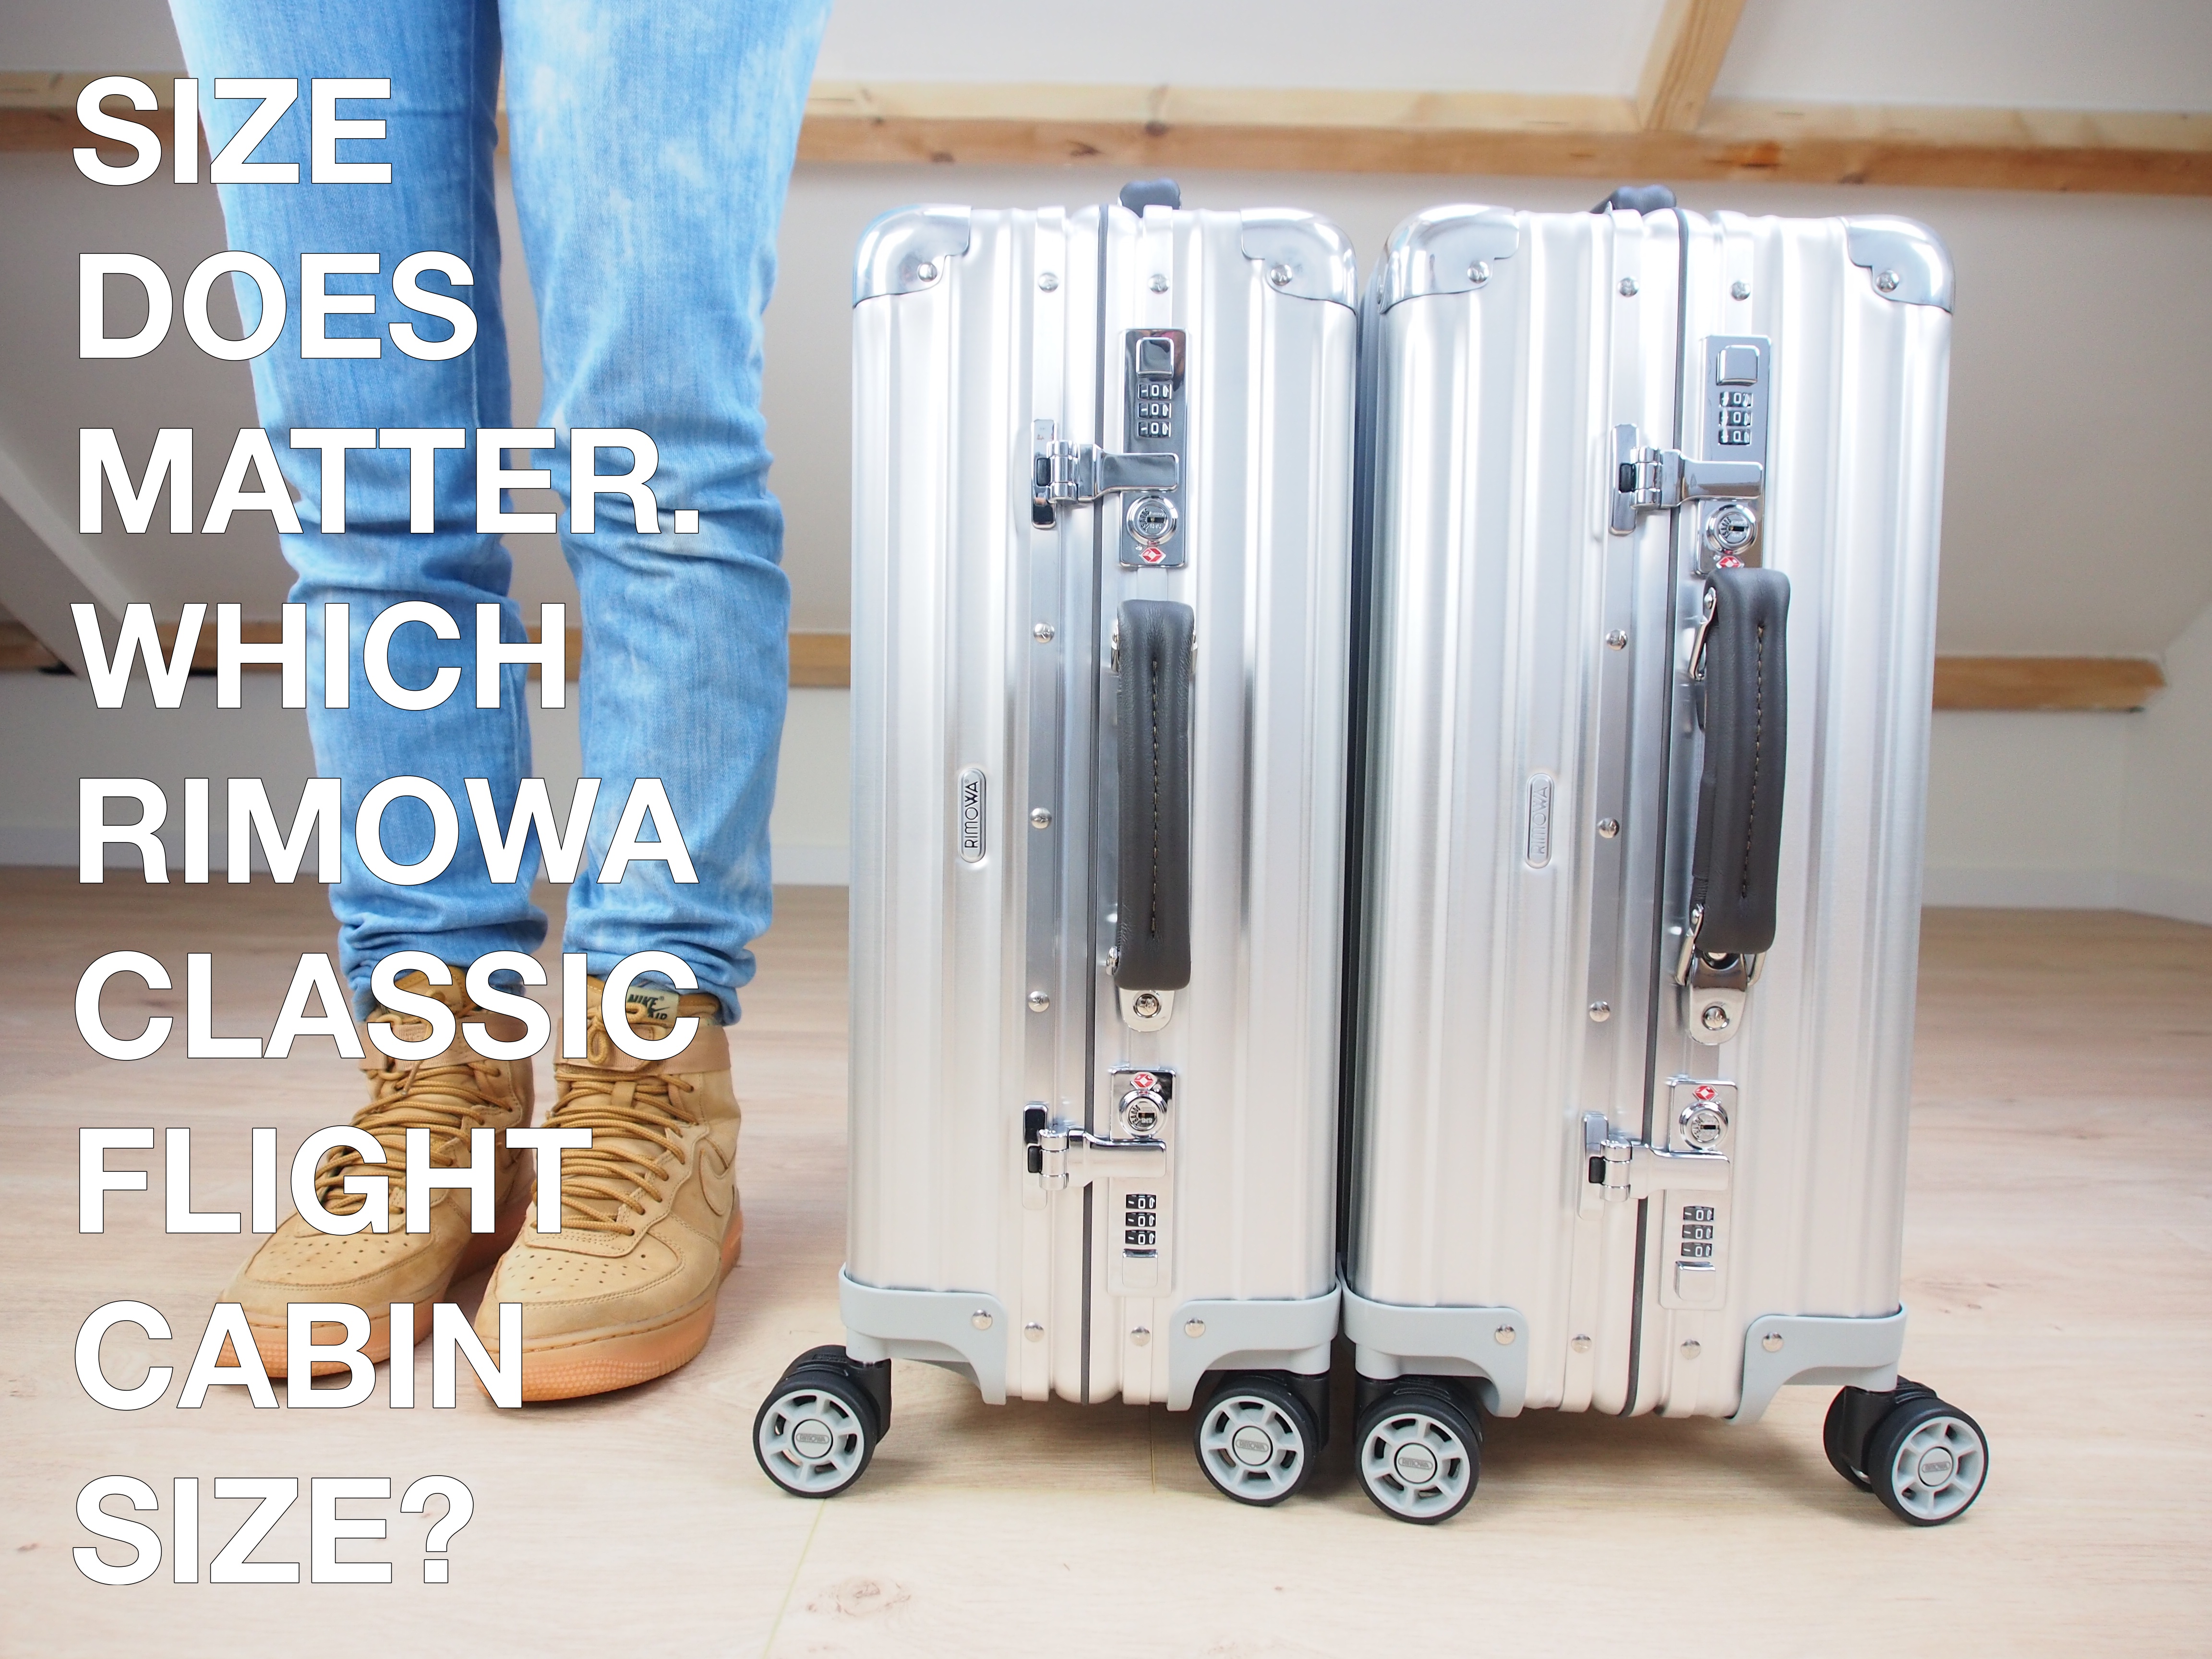 Size does matter: Which Rimowa Classic Flight Cabin Size?